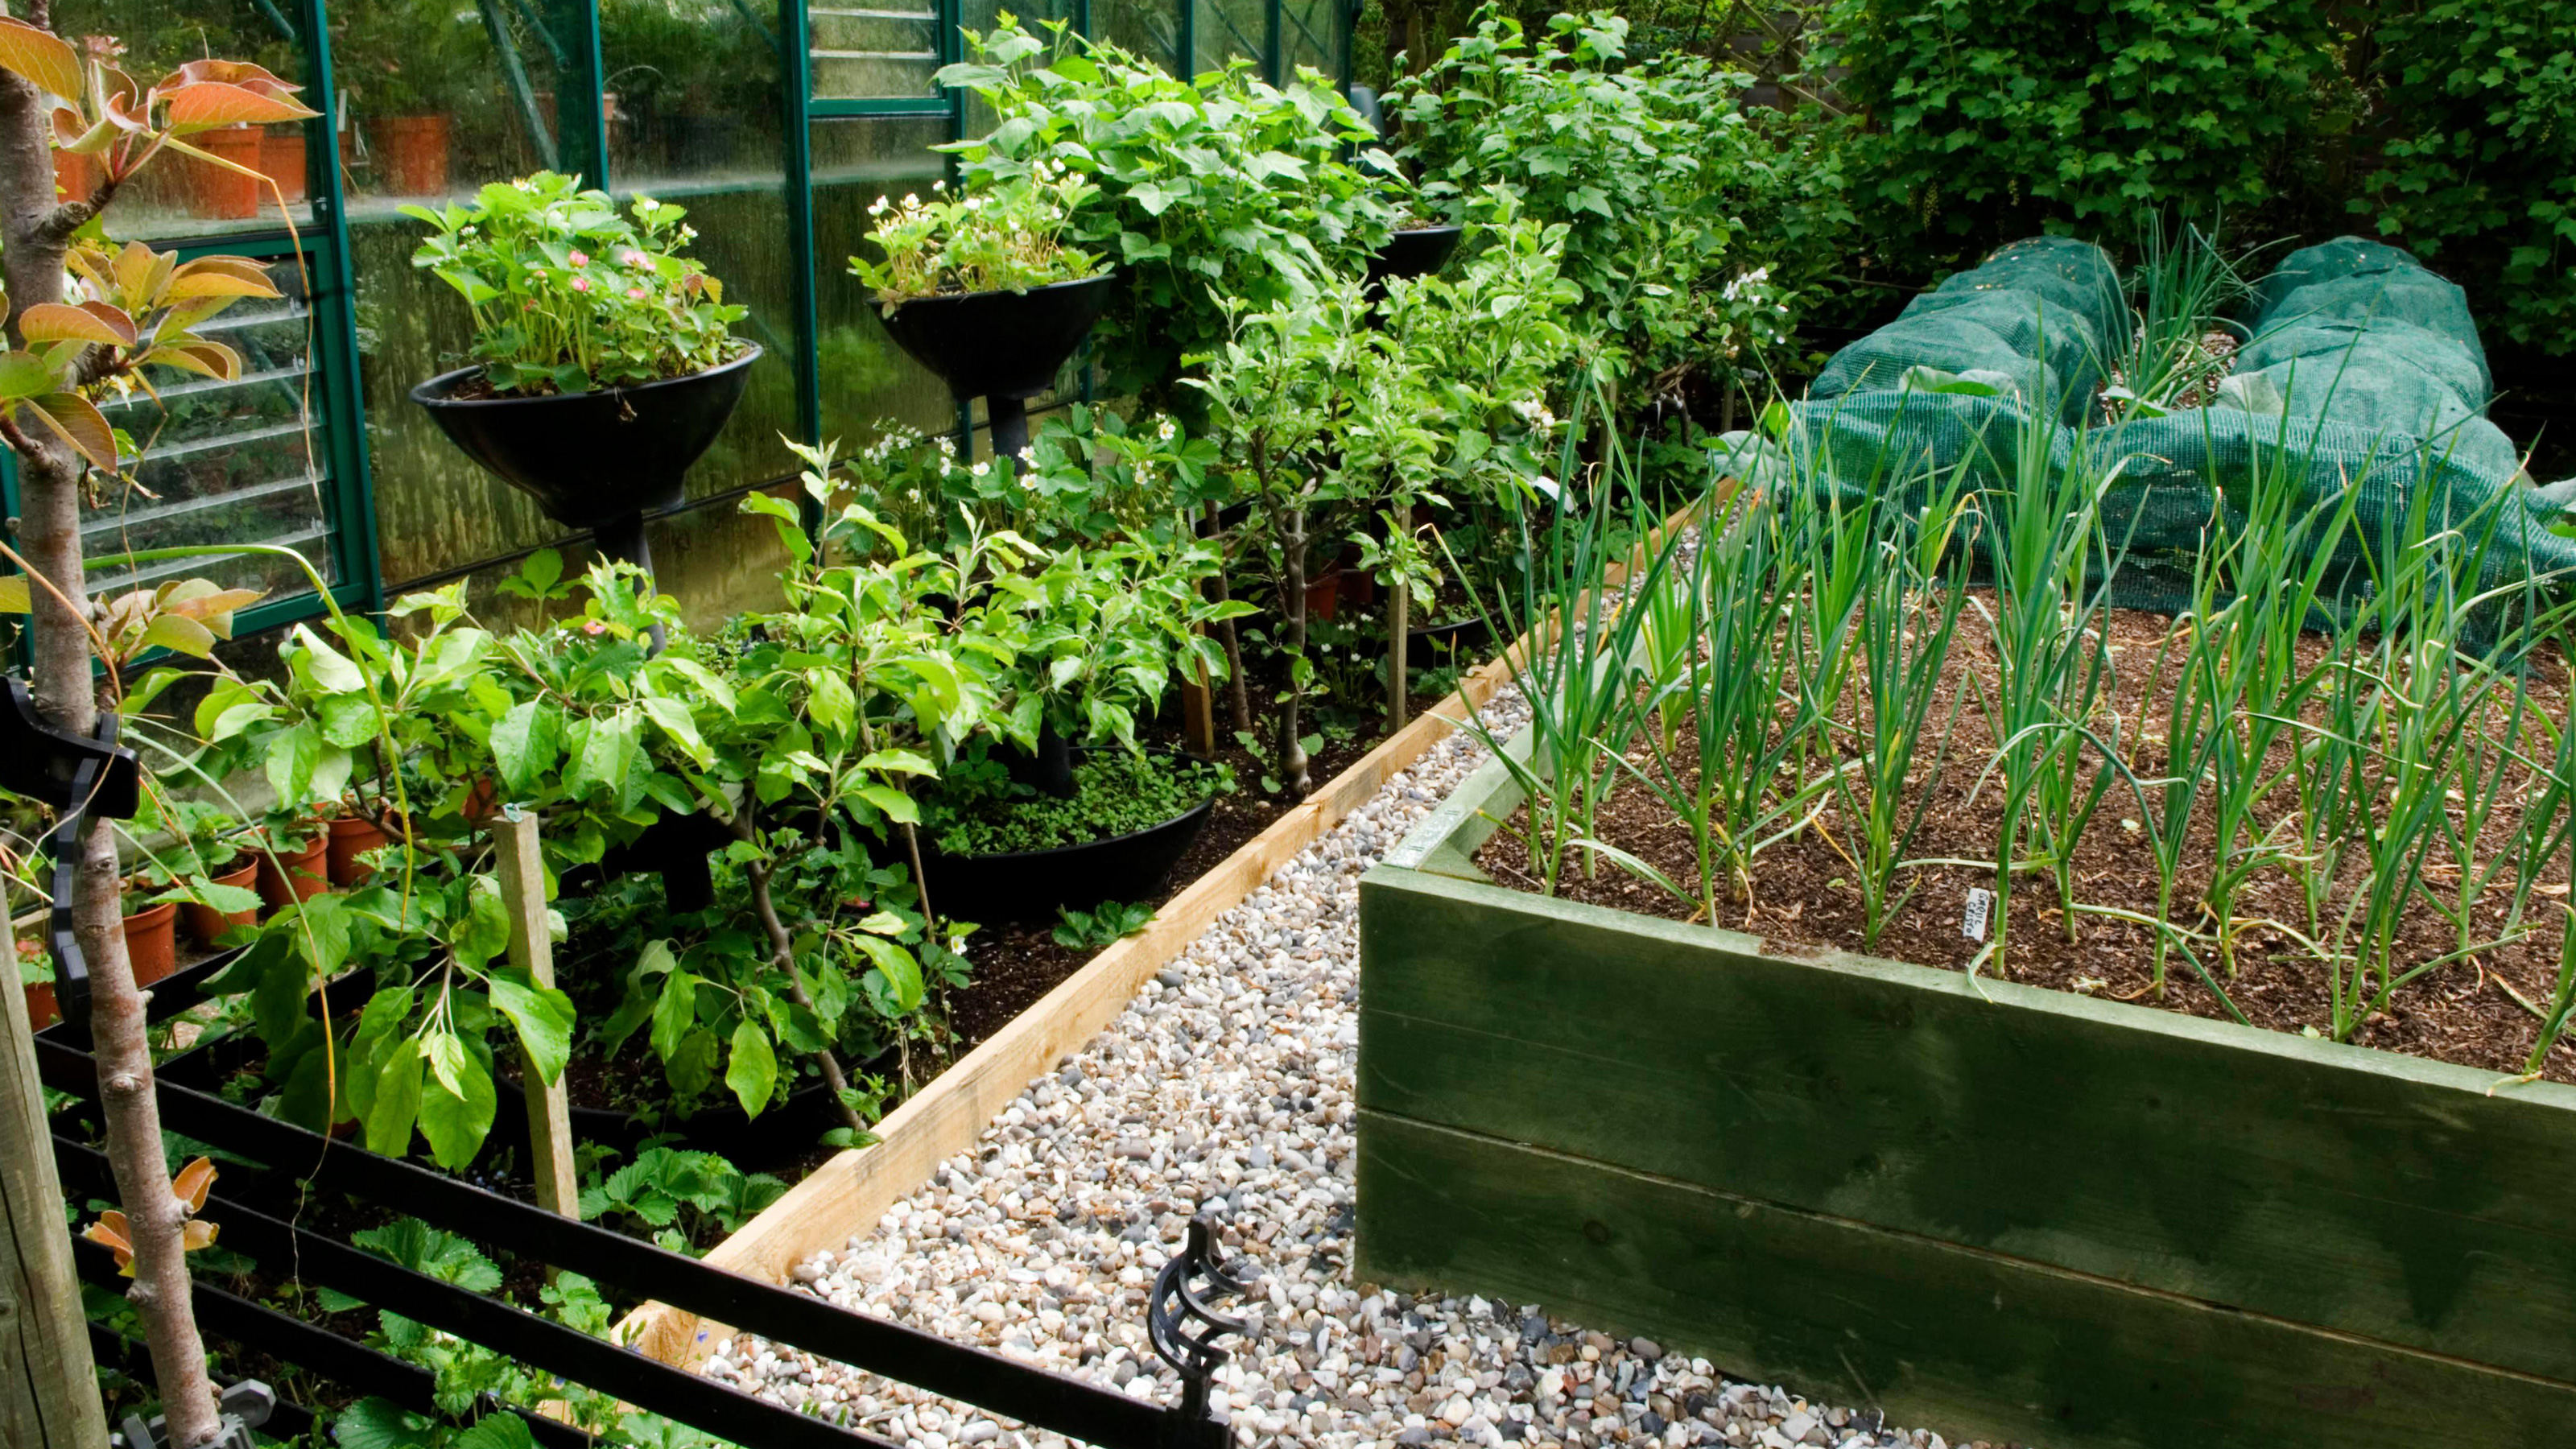 Here are some additional tips for building a raised garden bed: